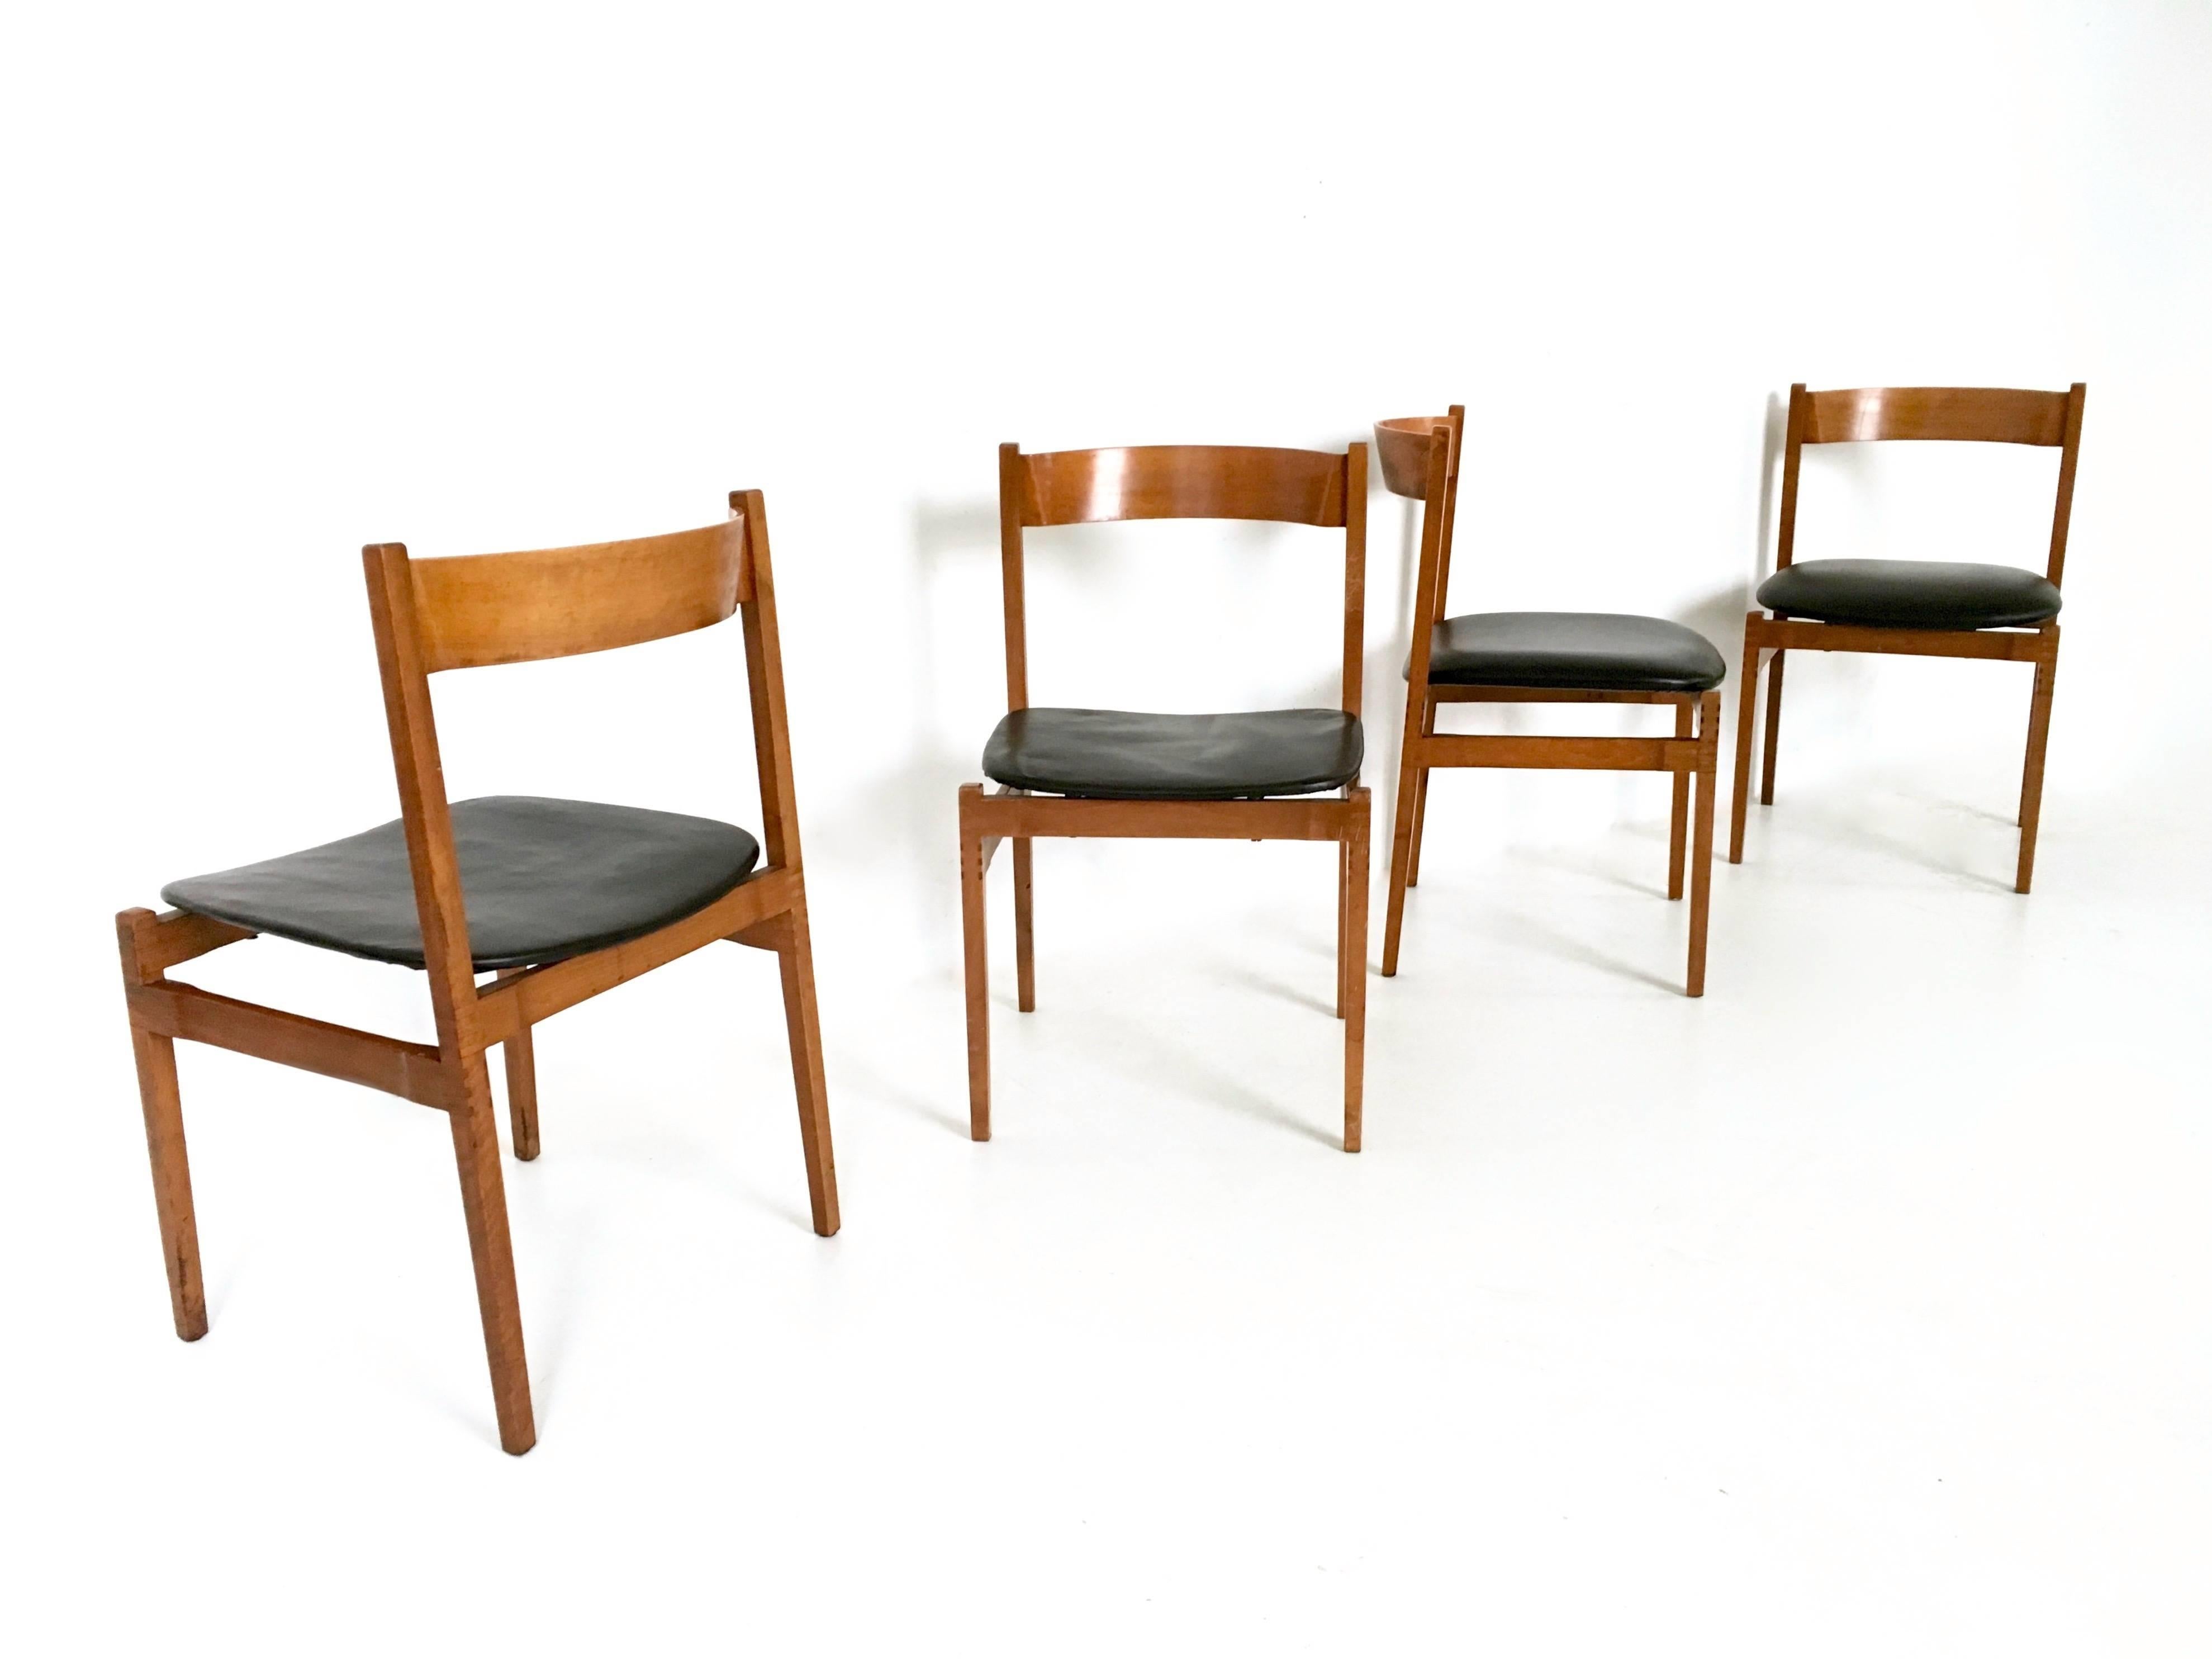 Italian Set of Four Chairs by Gianfranco Frattini for Cassina, 1950s